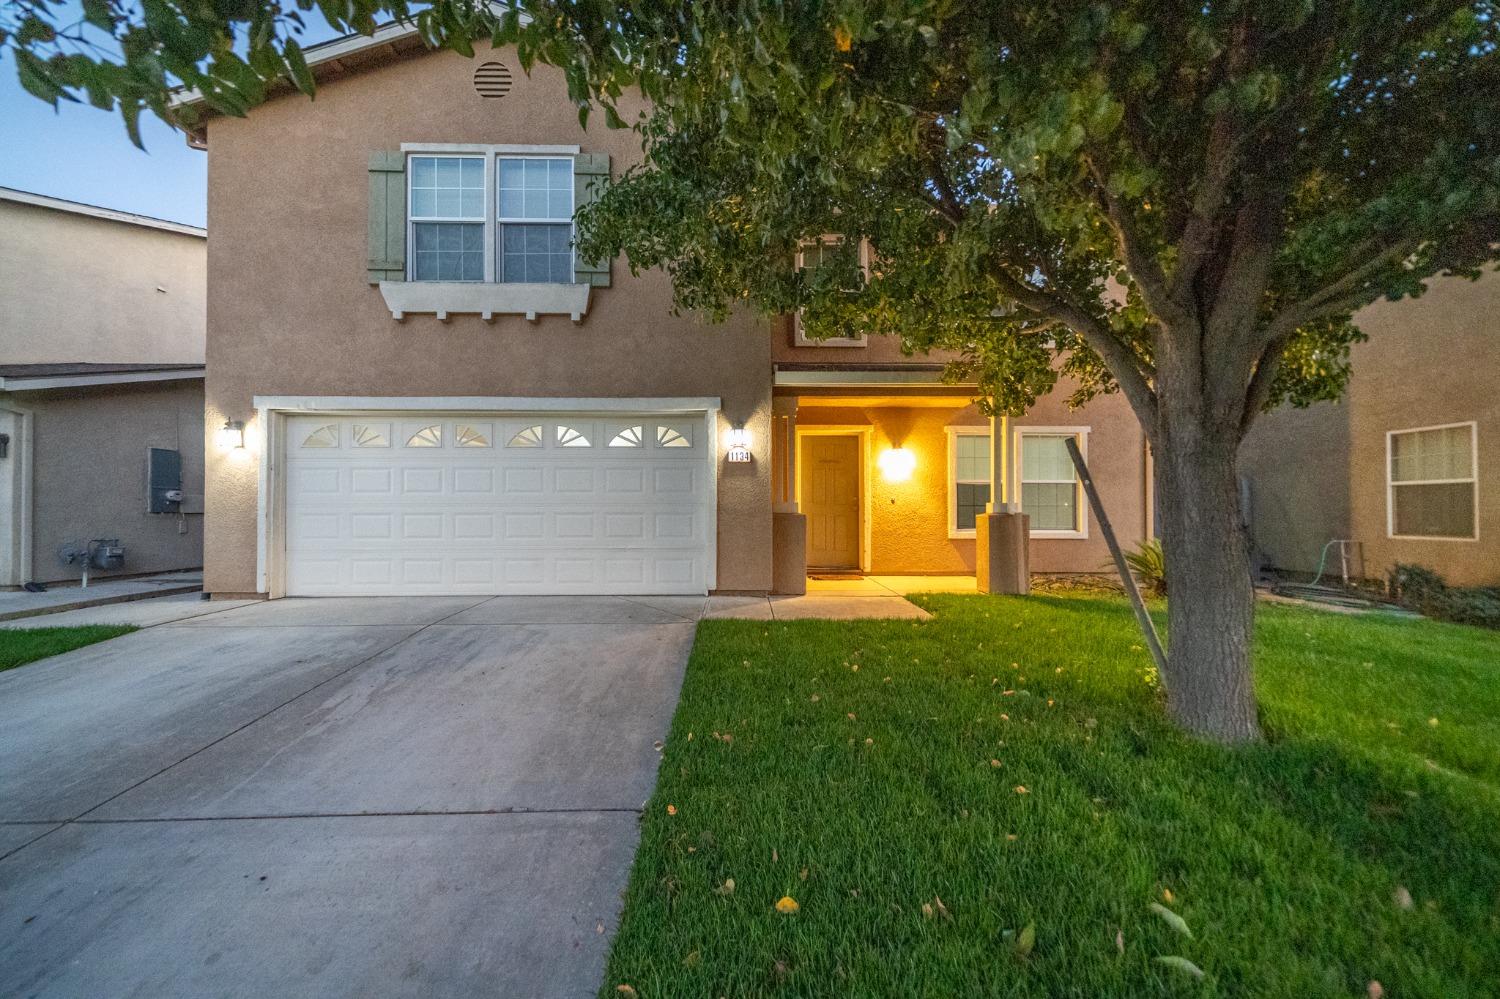 Photo of 1134 Crescent Dr in Merced, CA